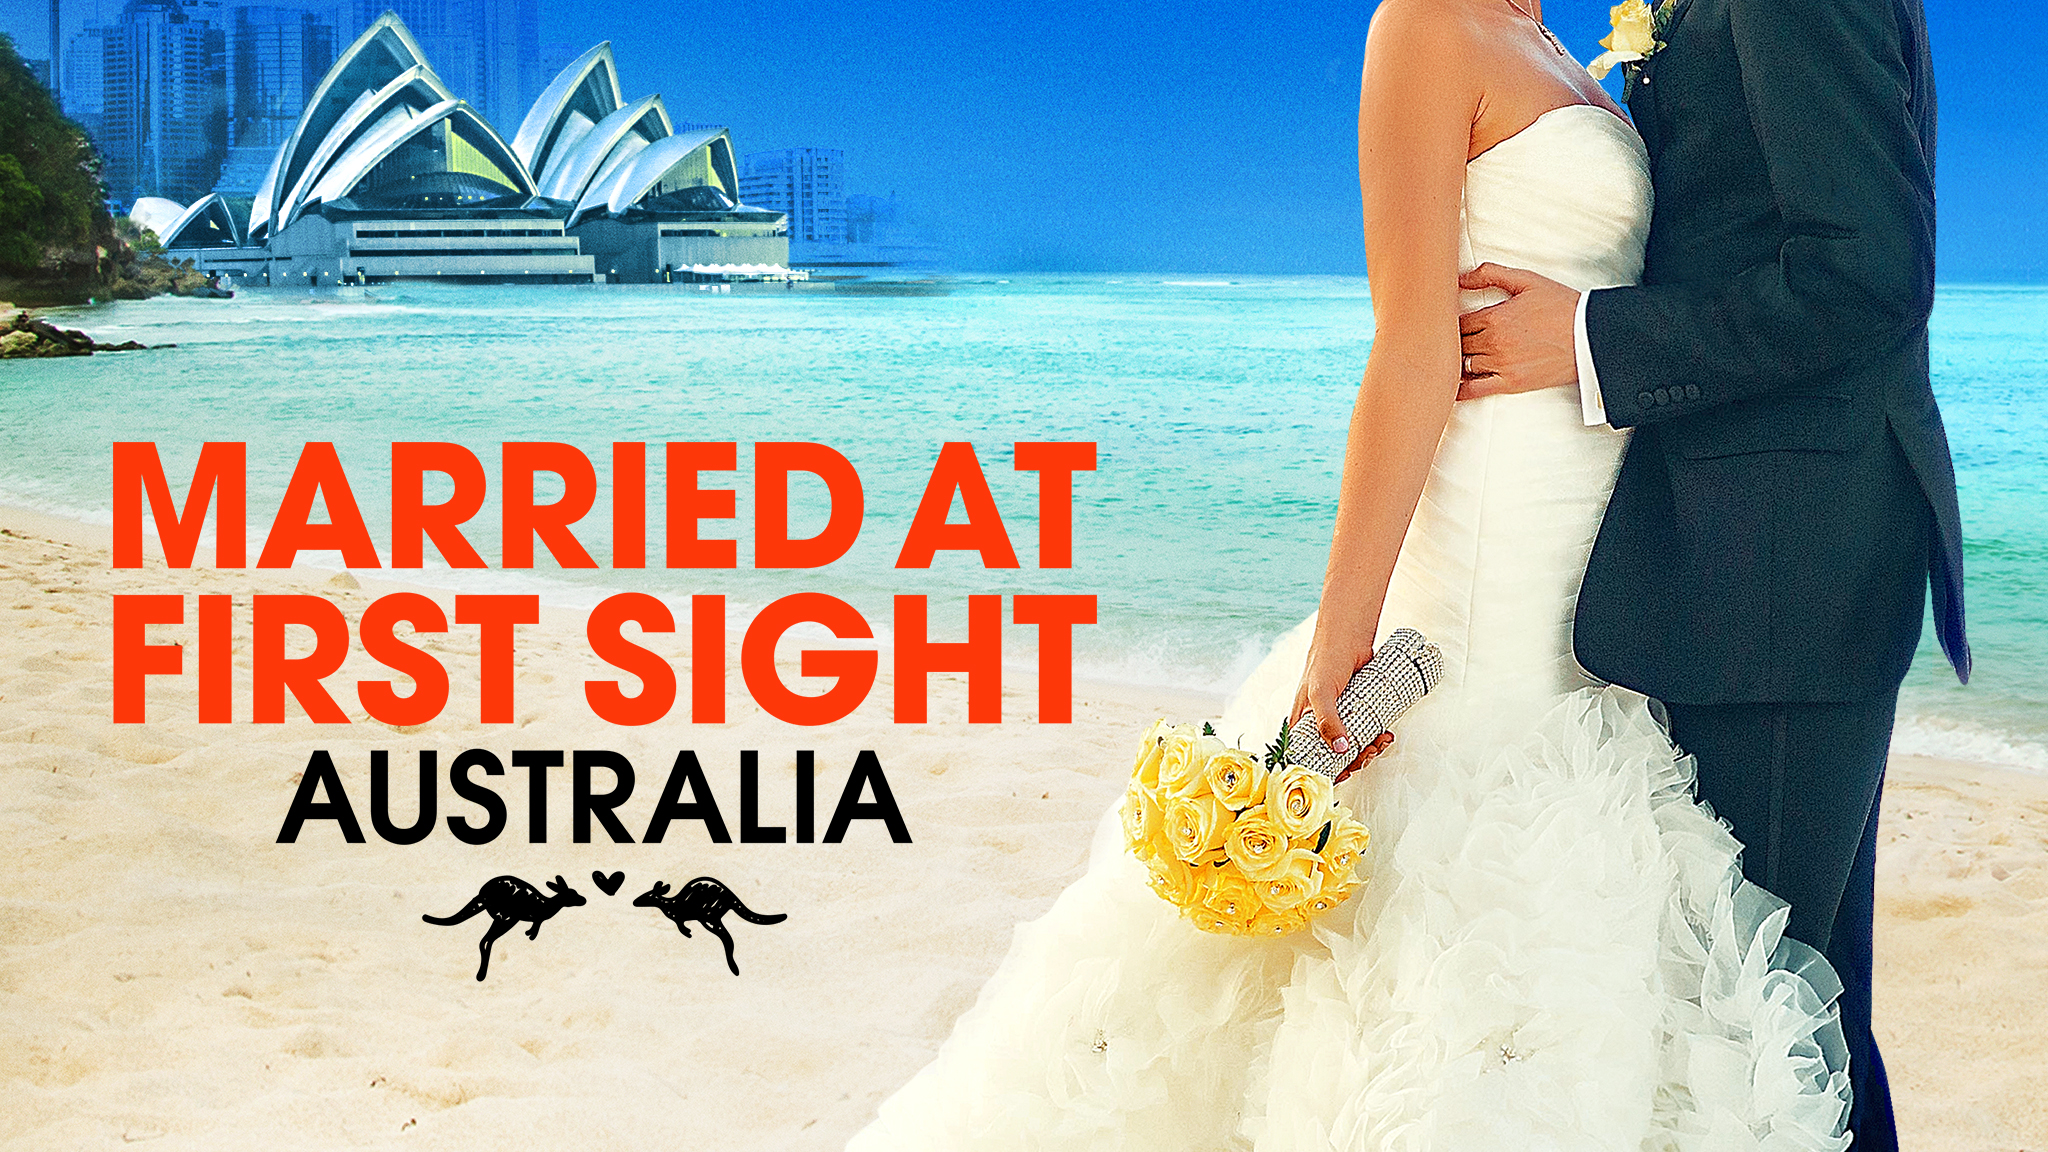 Married at First Sight: Australia Full Episodes, Video & More | Lifetime